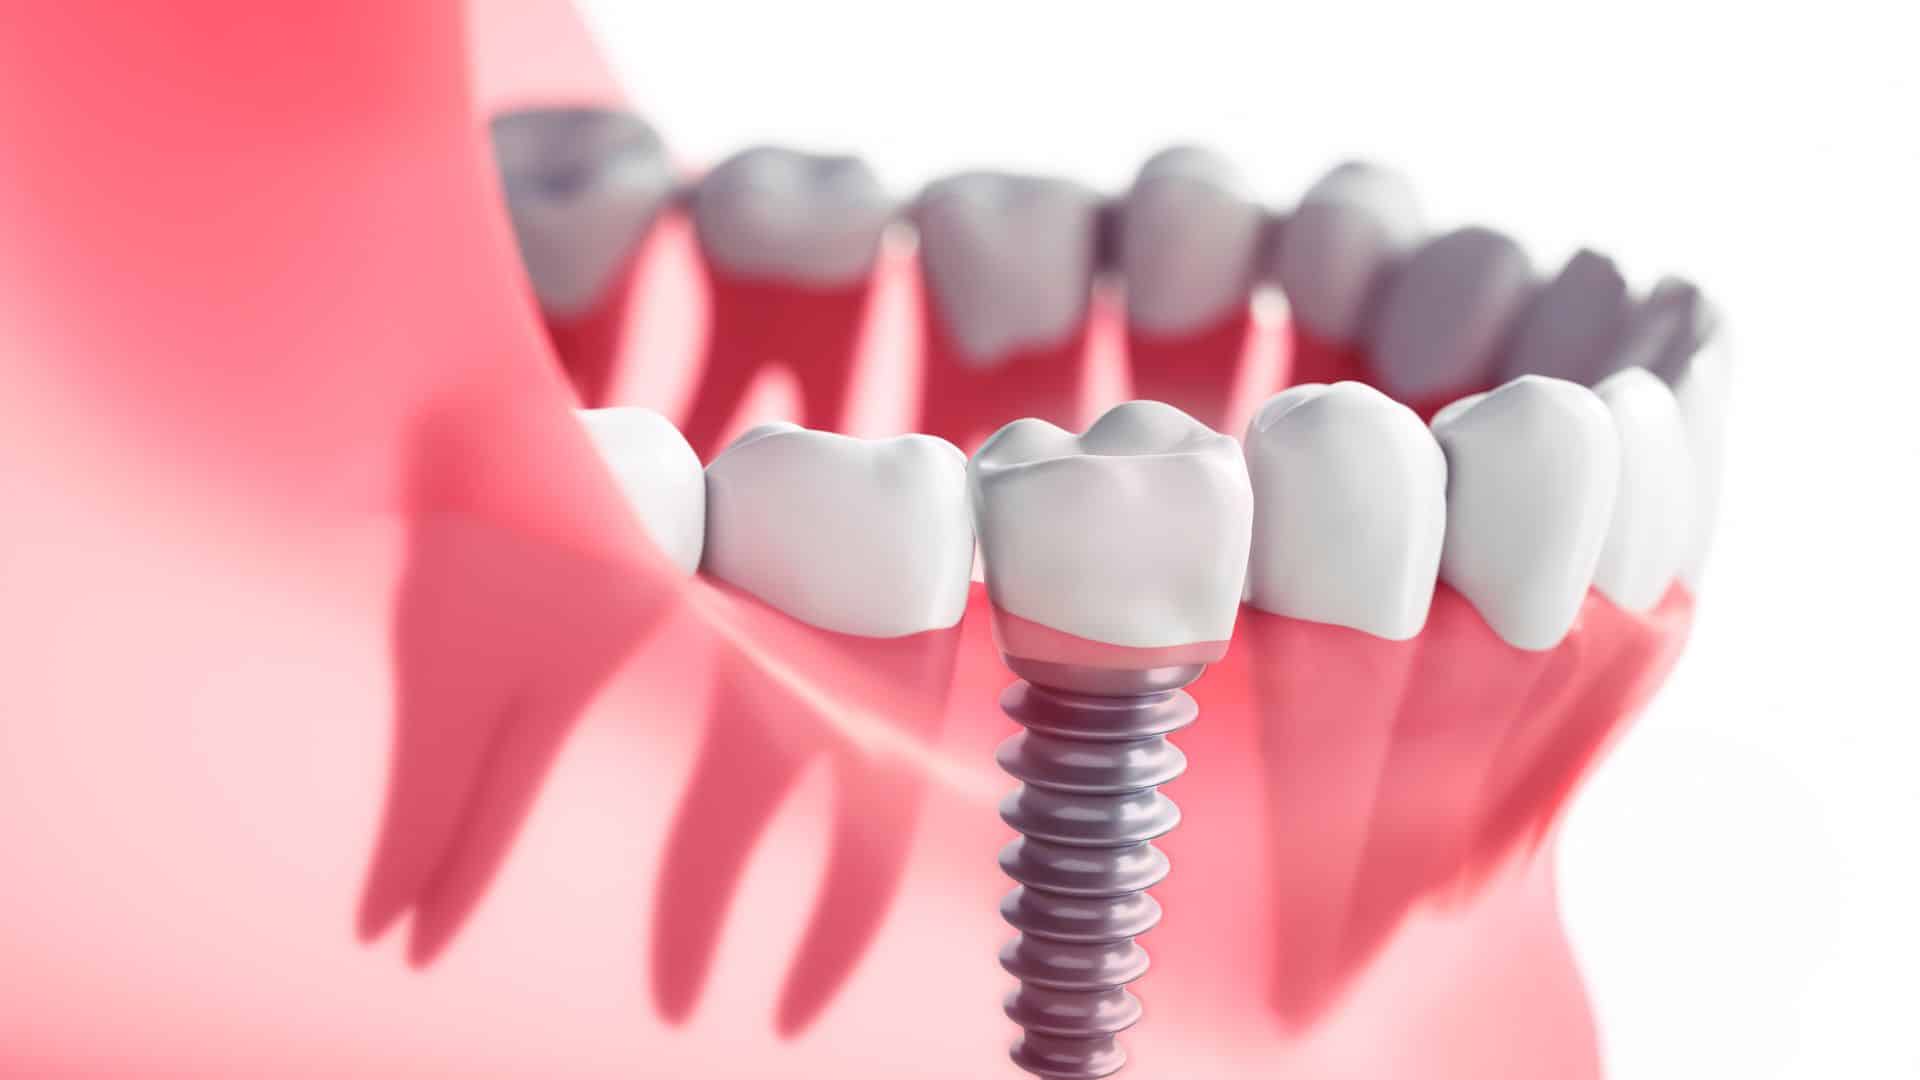 Rediscover Your Smile: Implant Dentists and Dental Implants in Las Vegas